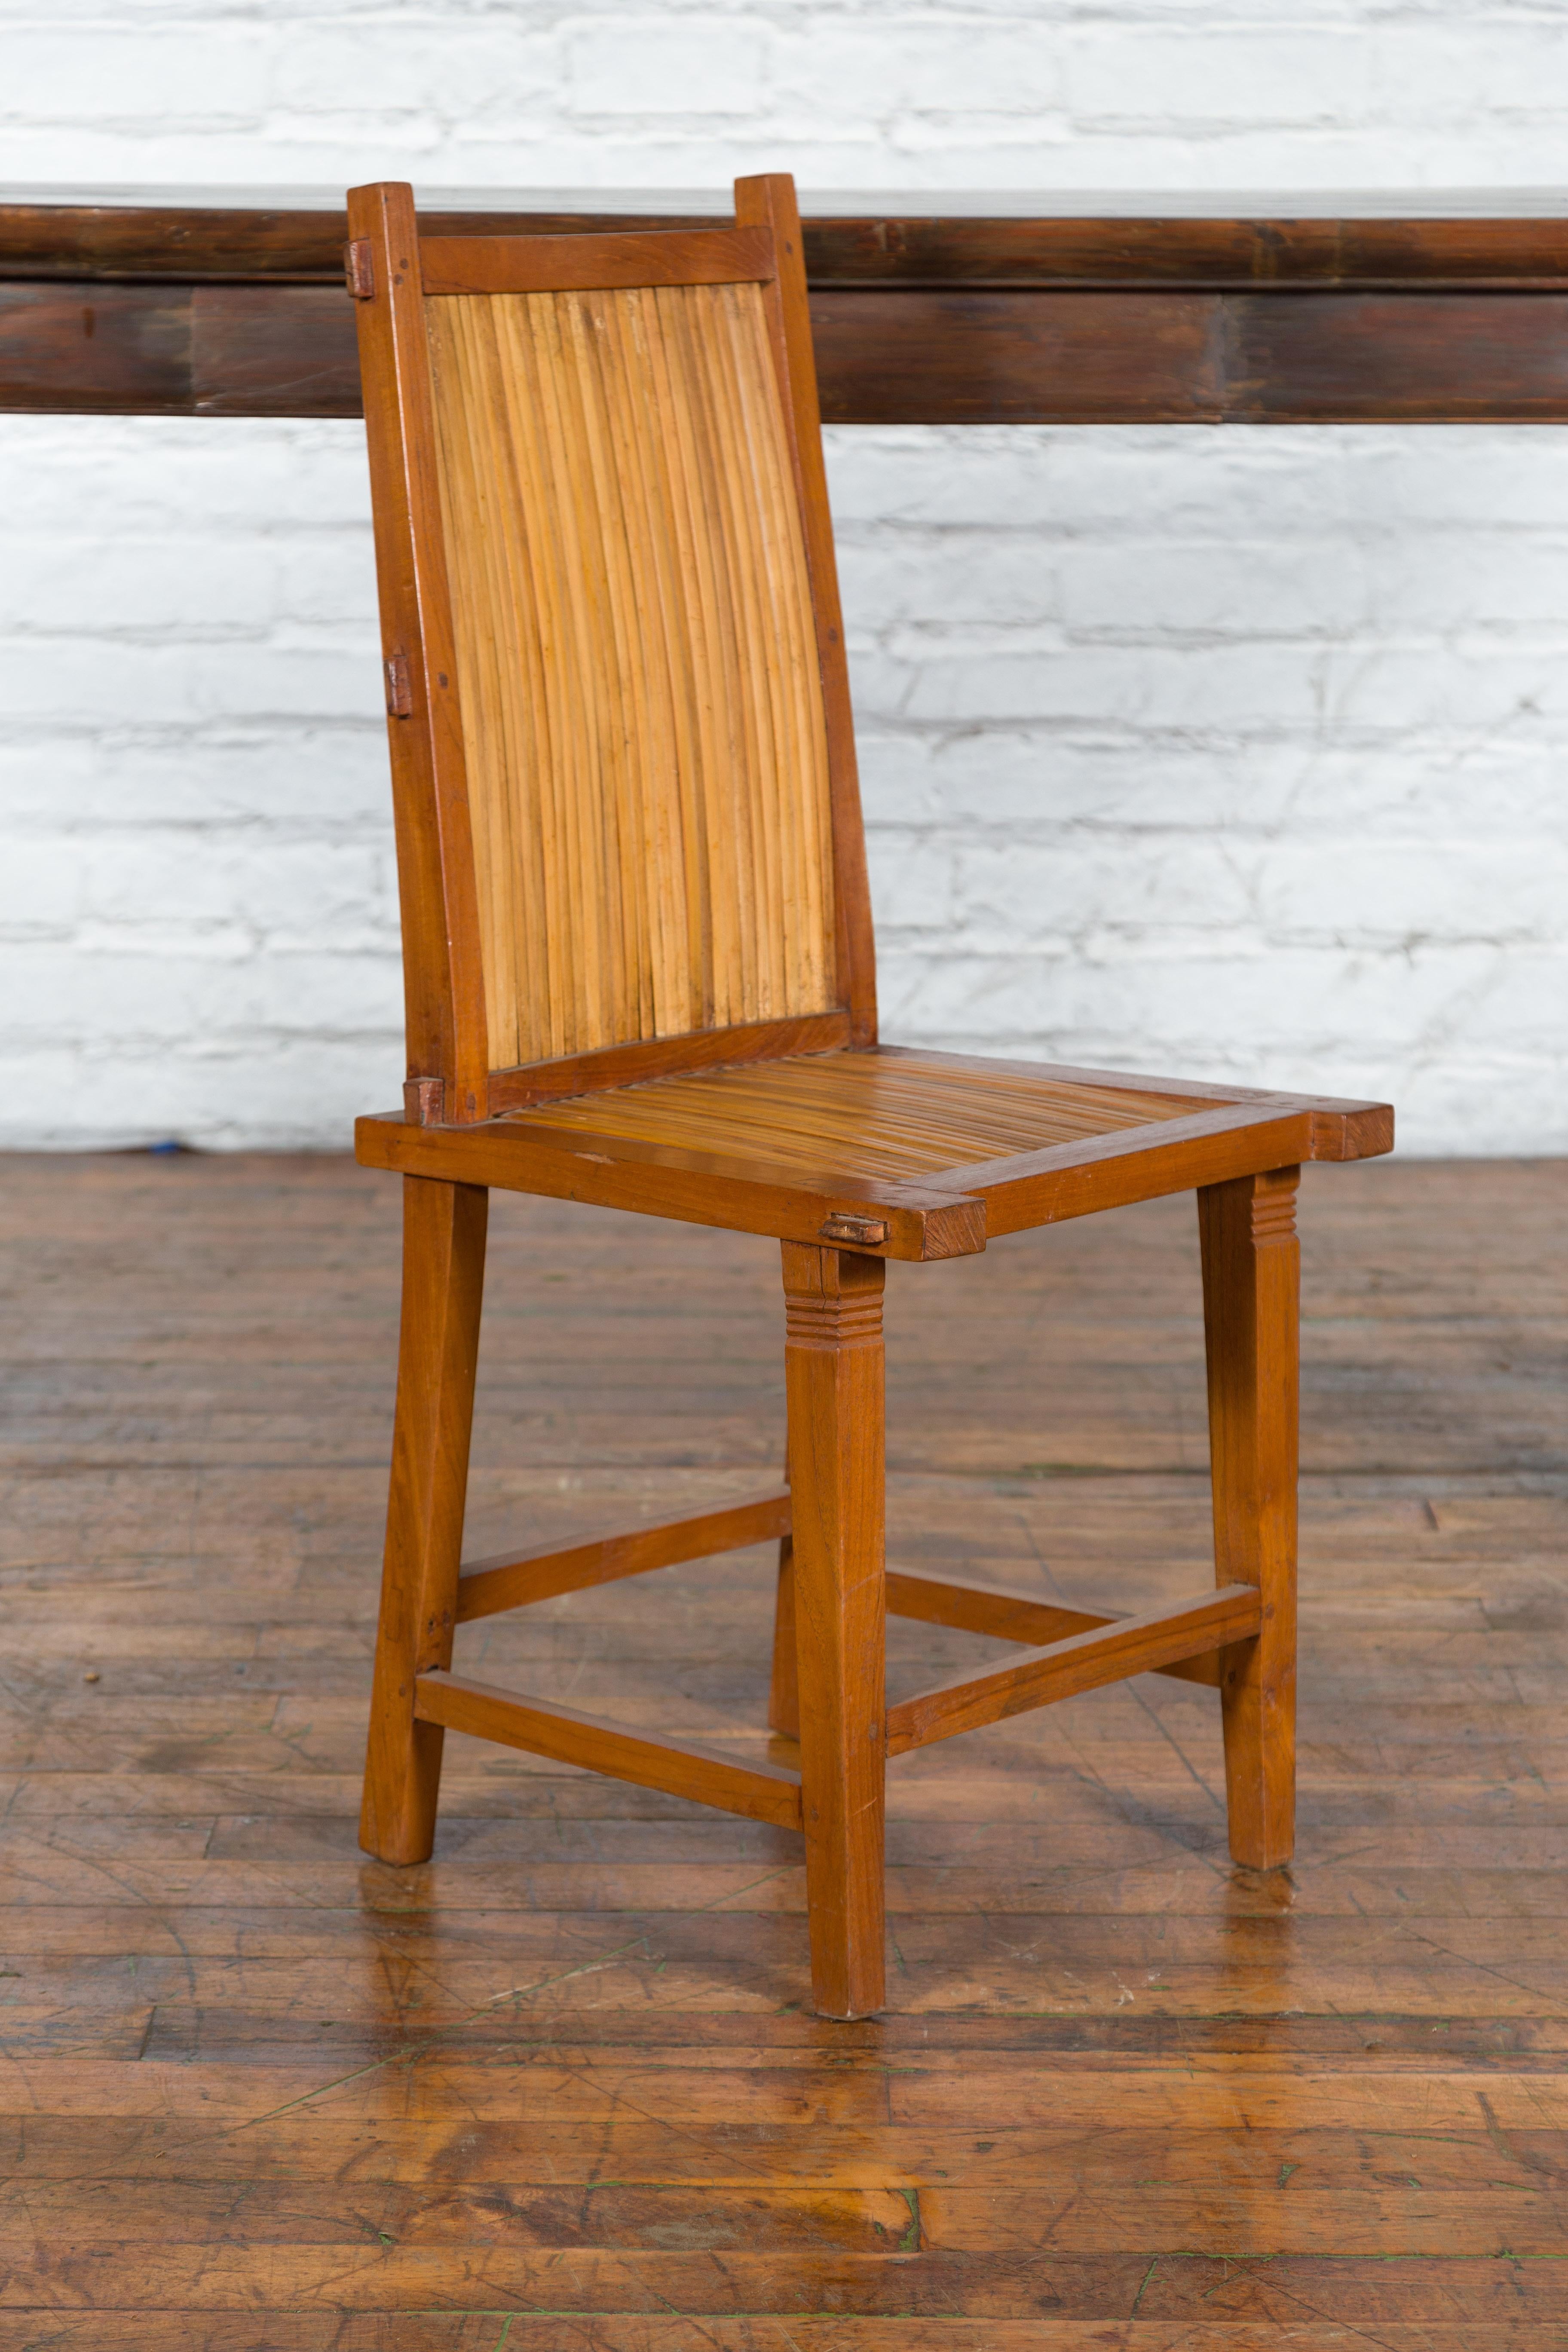 Rustic Javanese Vintage Wooden Side Chair with Slatted Bamboo Back and Seat For Sale 7